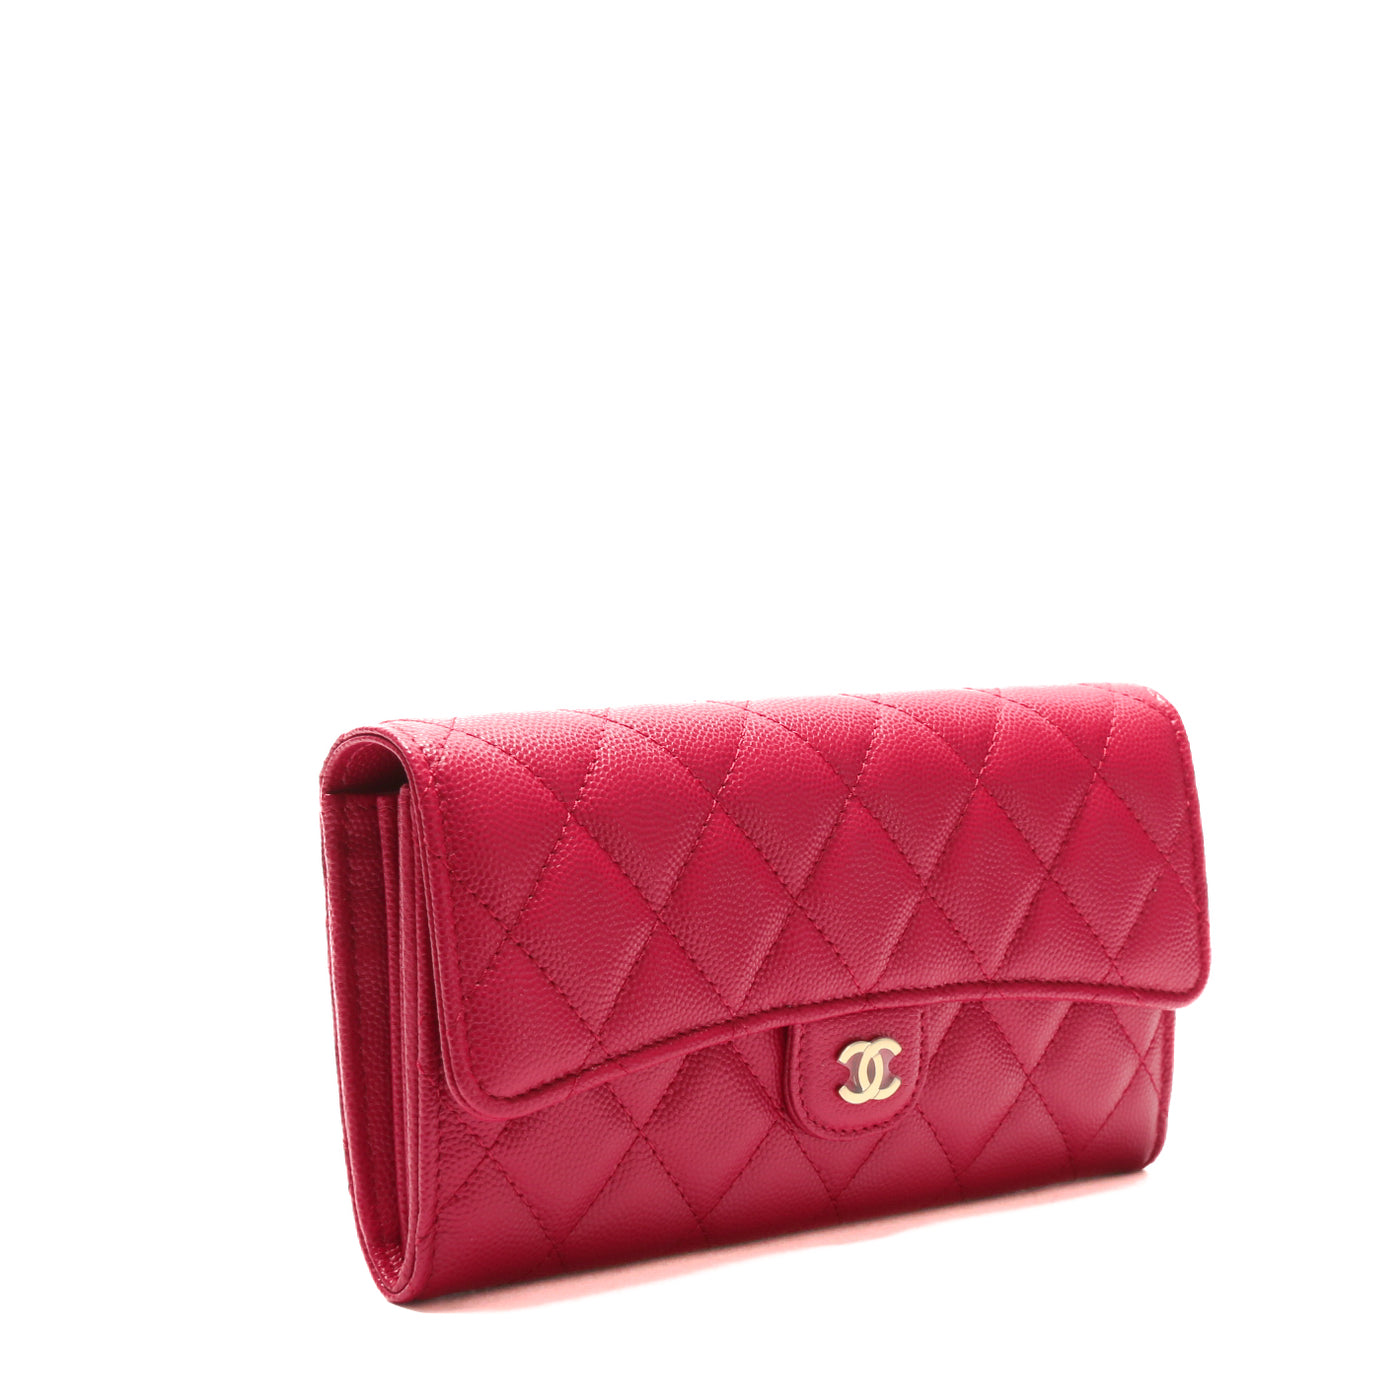 Chanel Classic Flap Wallet Ap0232 Y33352 NK289 in Stock, Pink, One Size